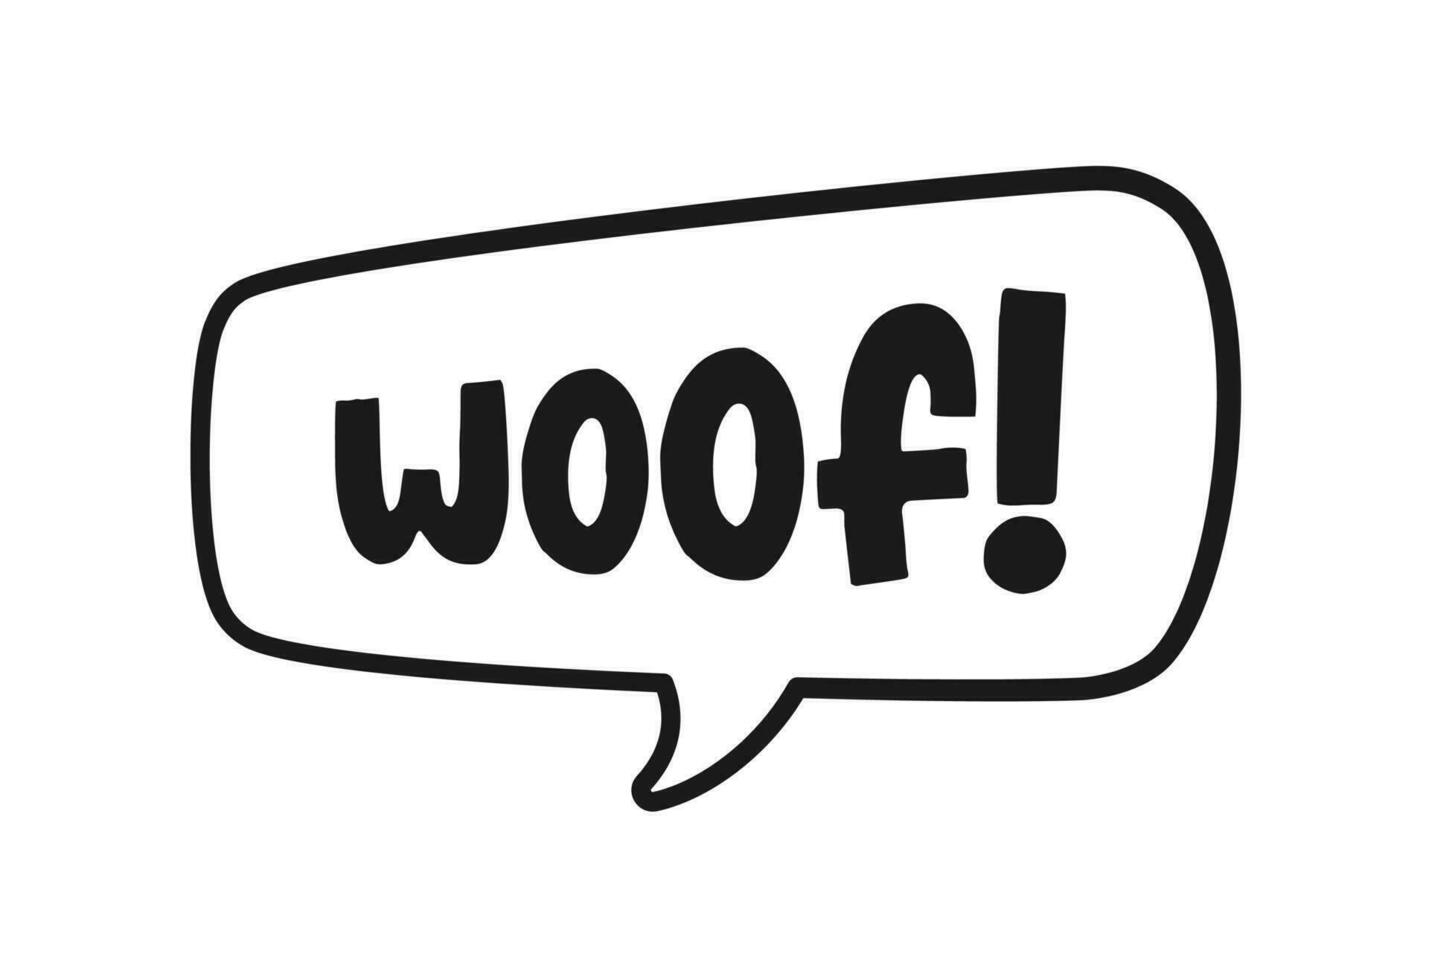 Woof text in a speech bubble balloon doodle. Cartoon comics dog bark sound effect and lettering. Simple black and white outline flat vector illustration design on white background.